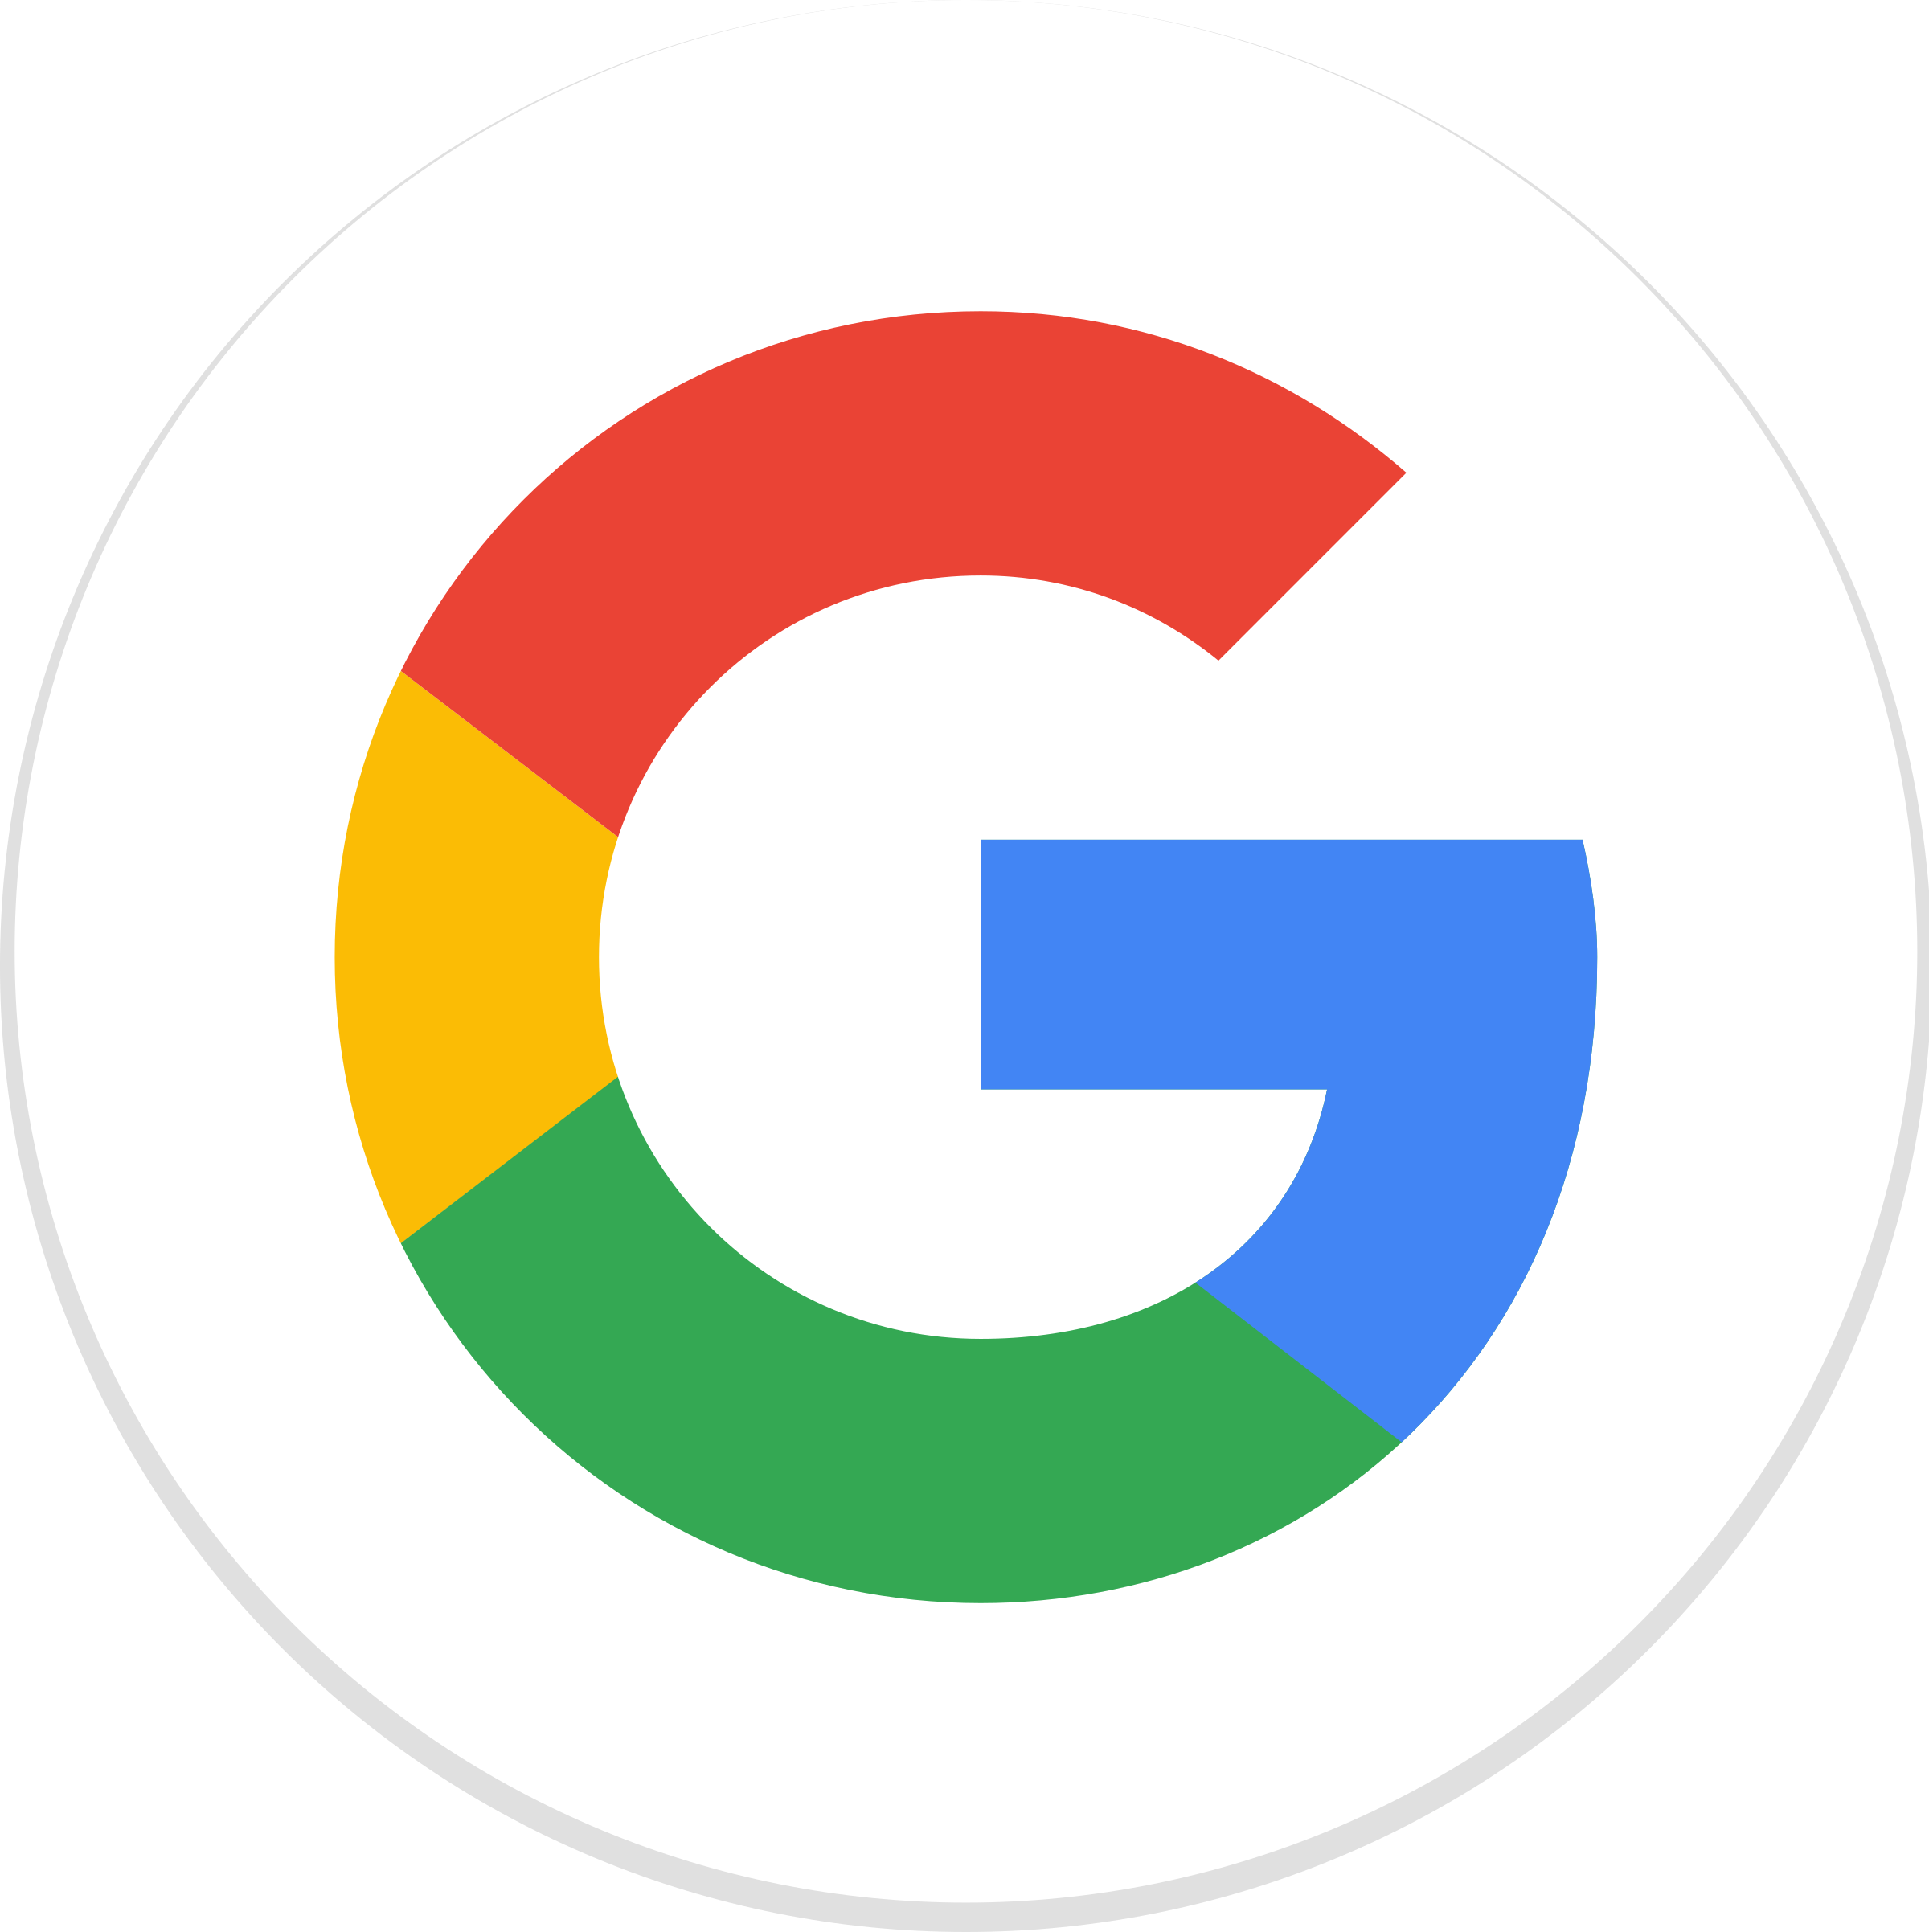 Google review icon